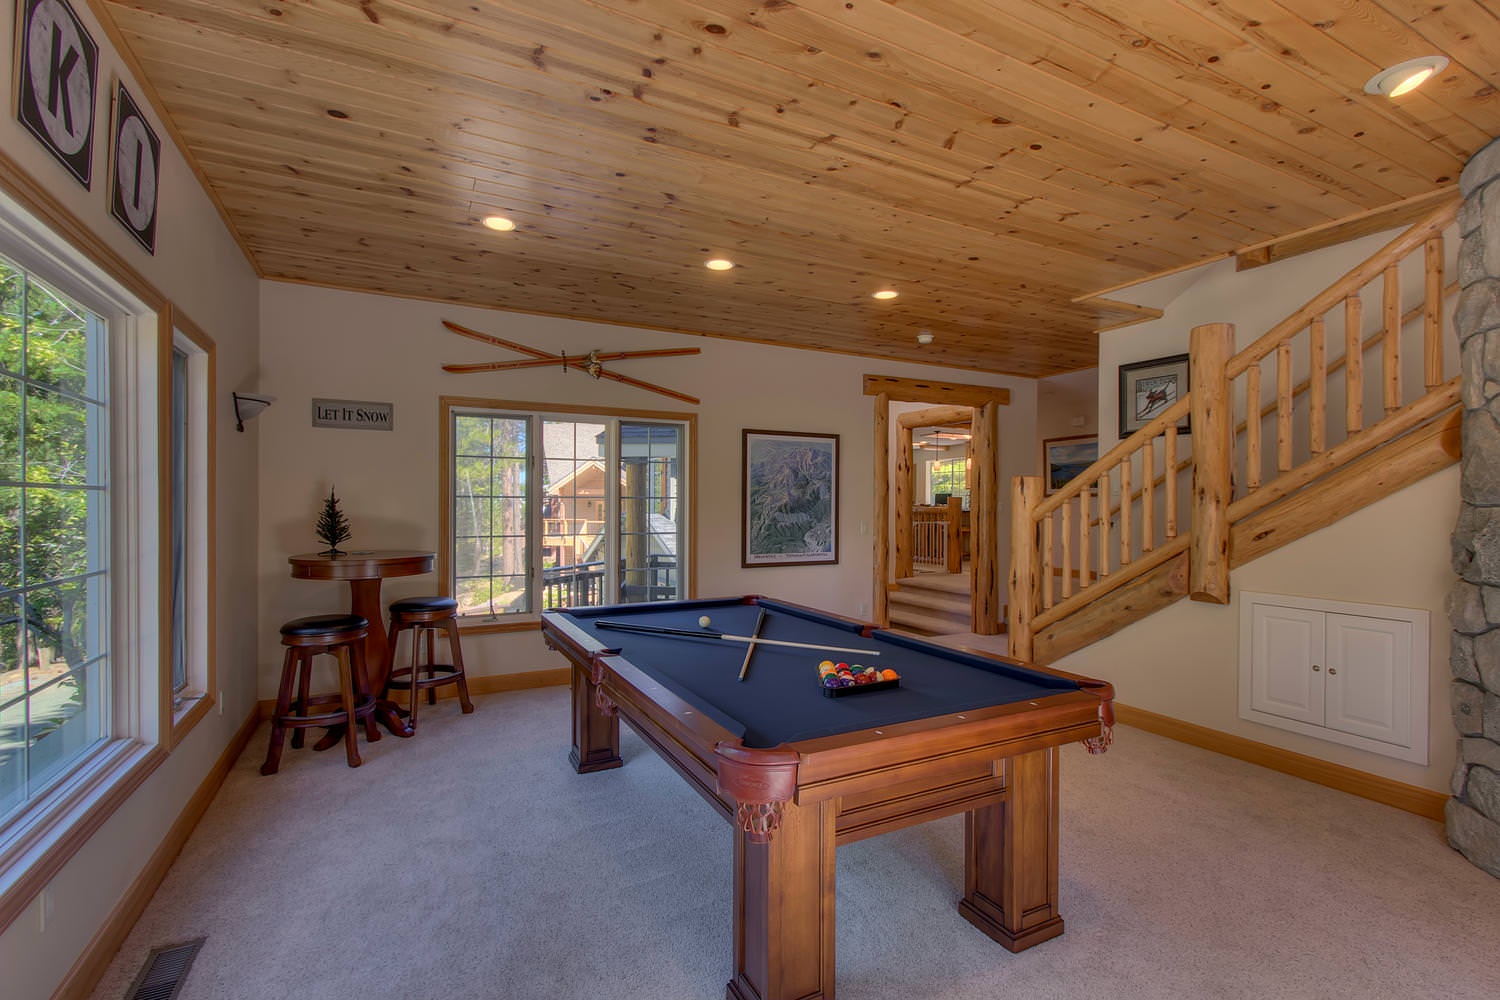 Downstairs game room with pool table and Smart TV